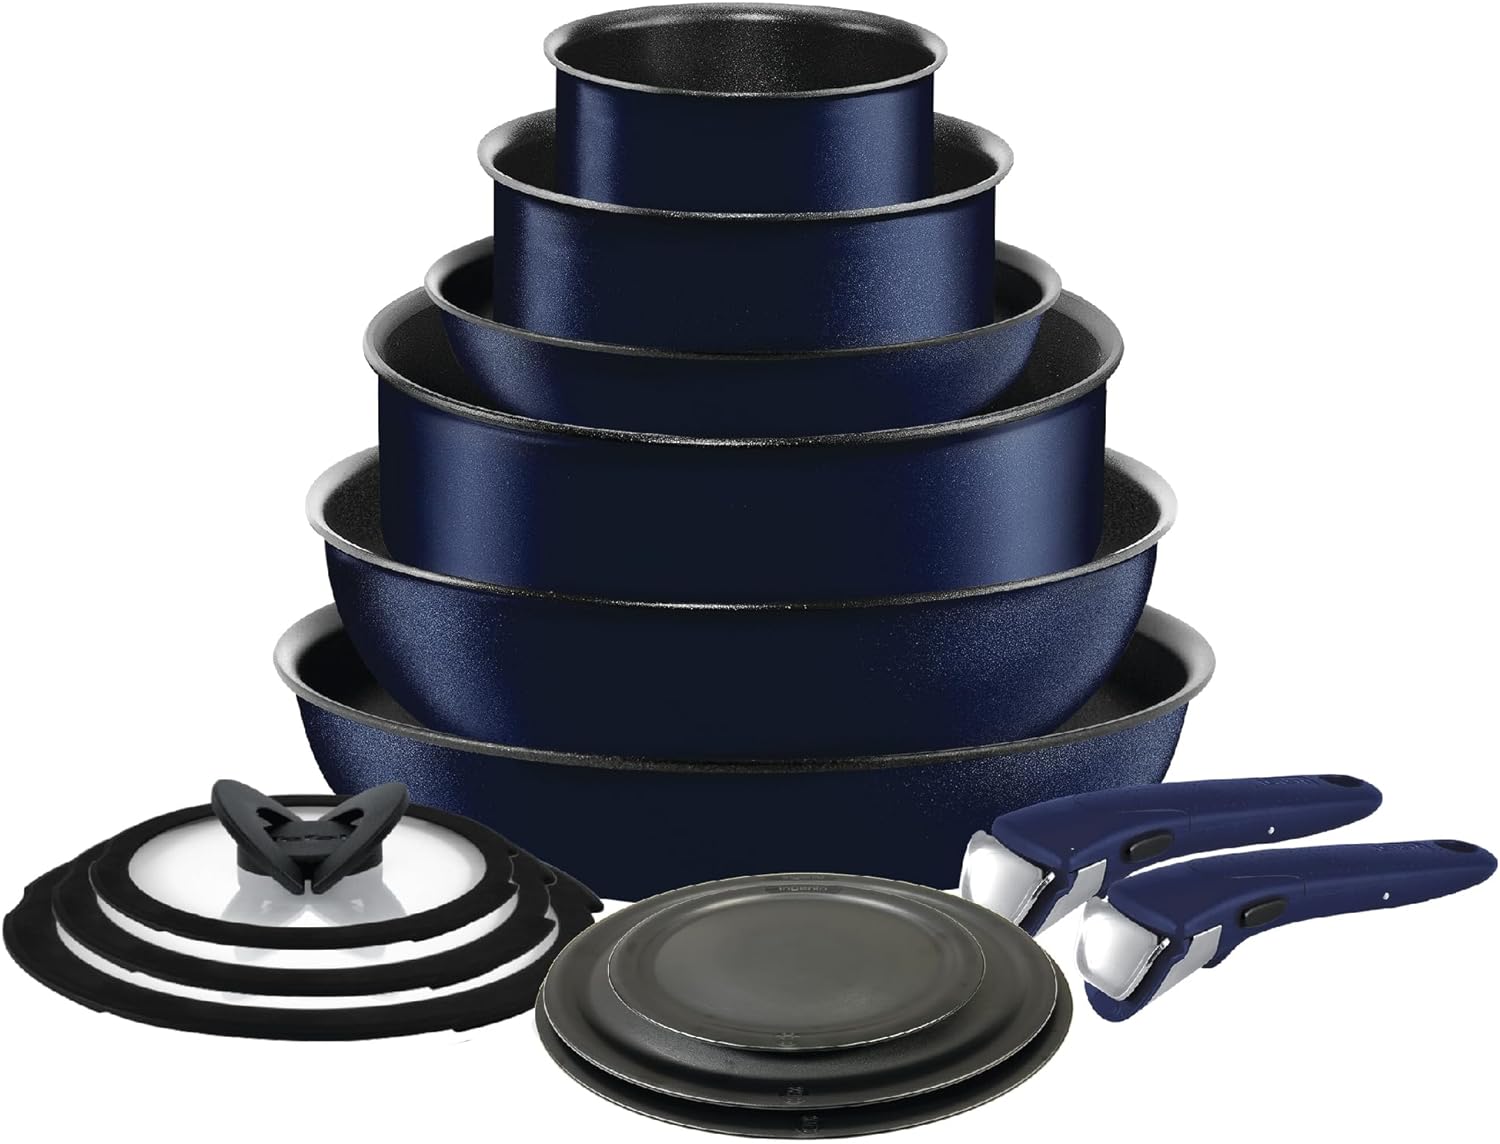 Stack of pans and pots